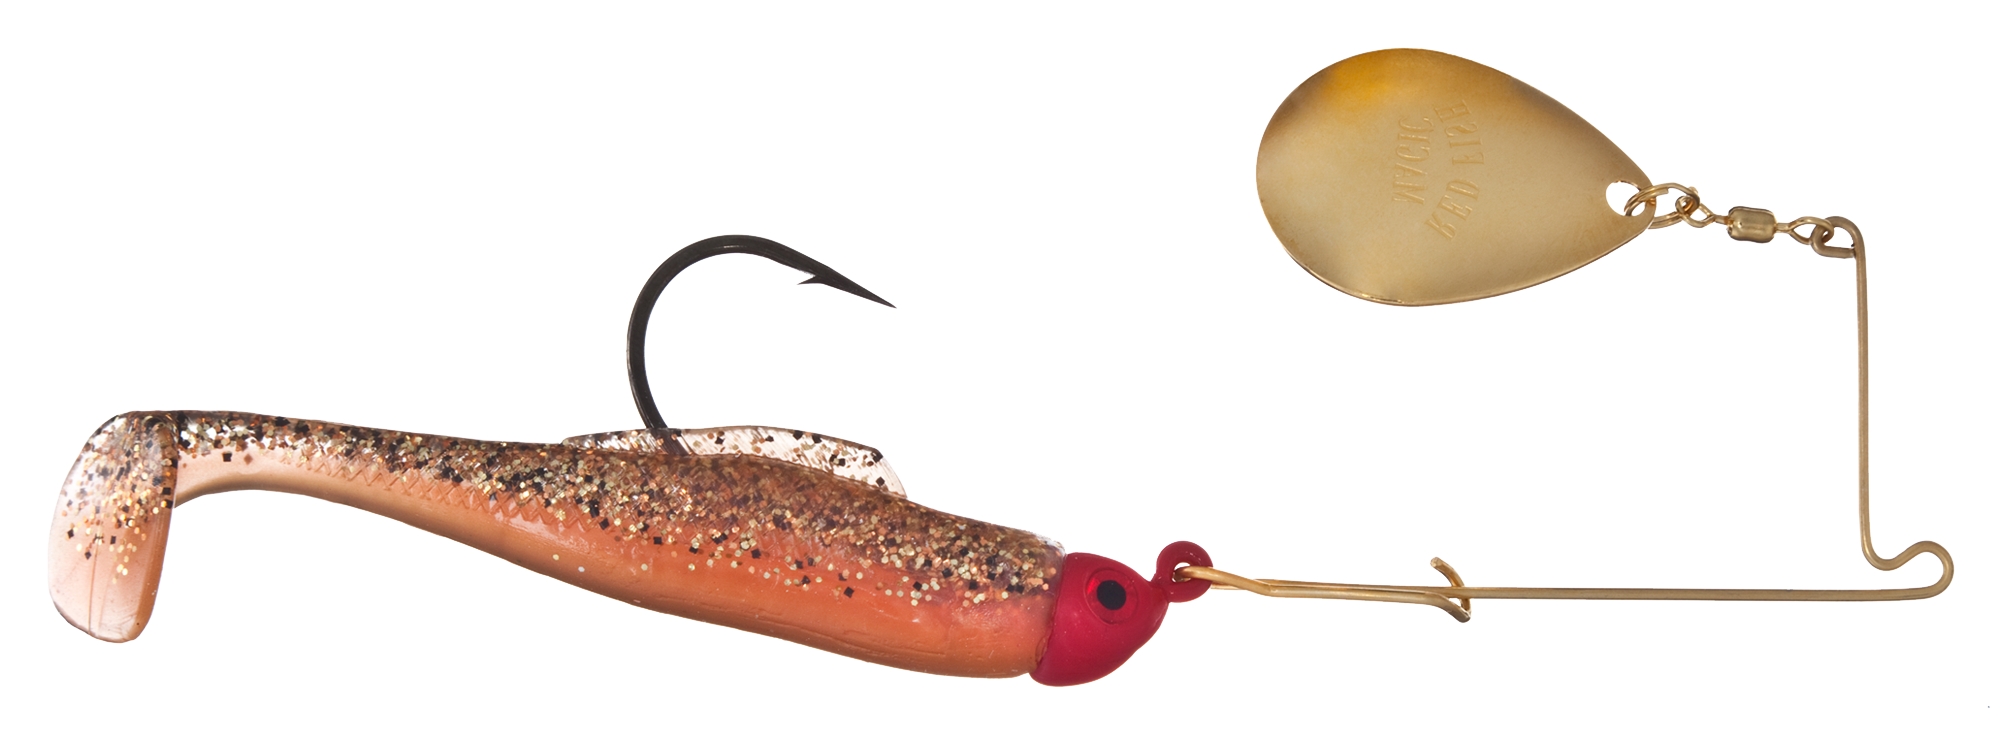 Bimini Lures Pro Snap Weights for trolling - Red Australia